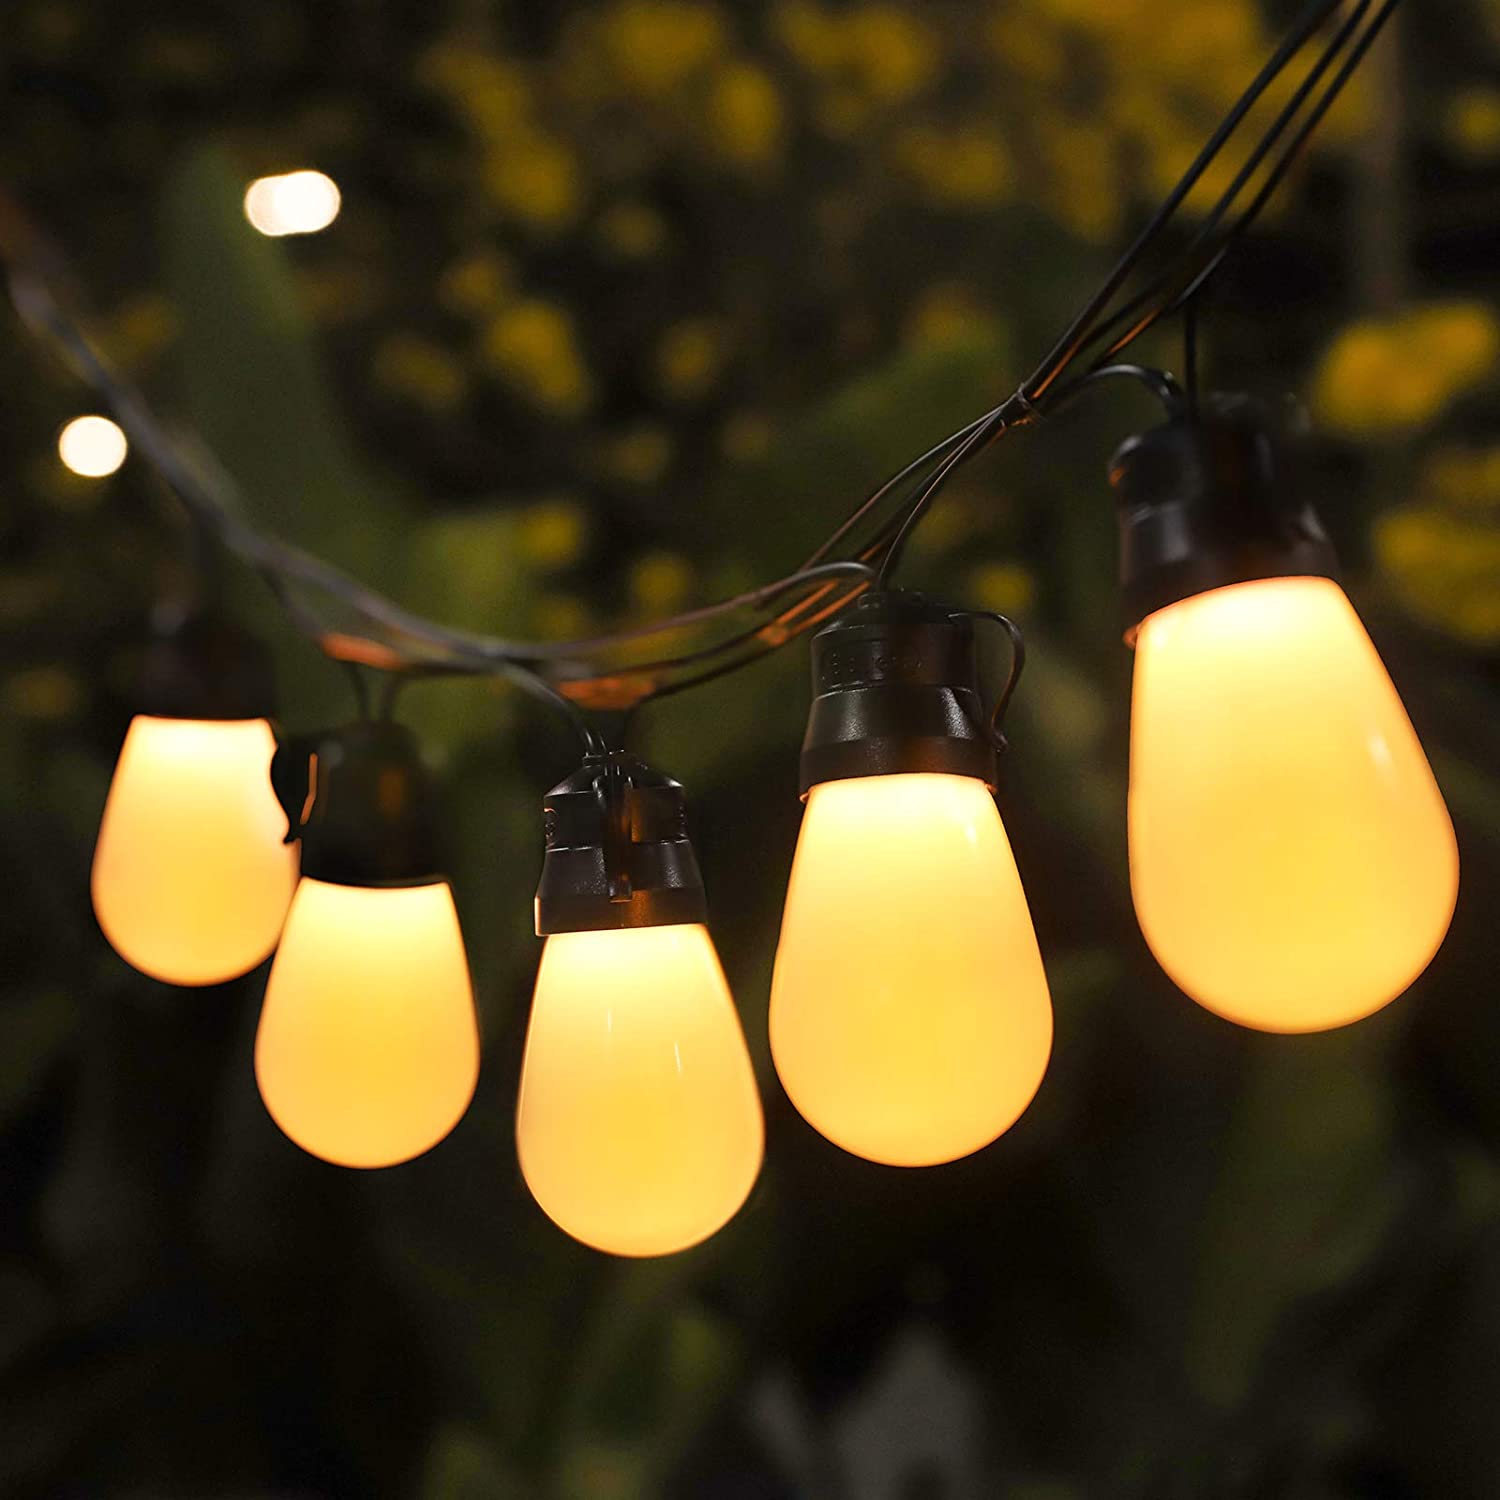 Govee 48FT Outdoor String Lights, Shatterproof Remote Patio Lights with 15 Dimmable Warm Yellow LED Bulbs $26.99 + Free Shipping